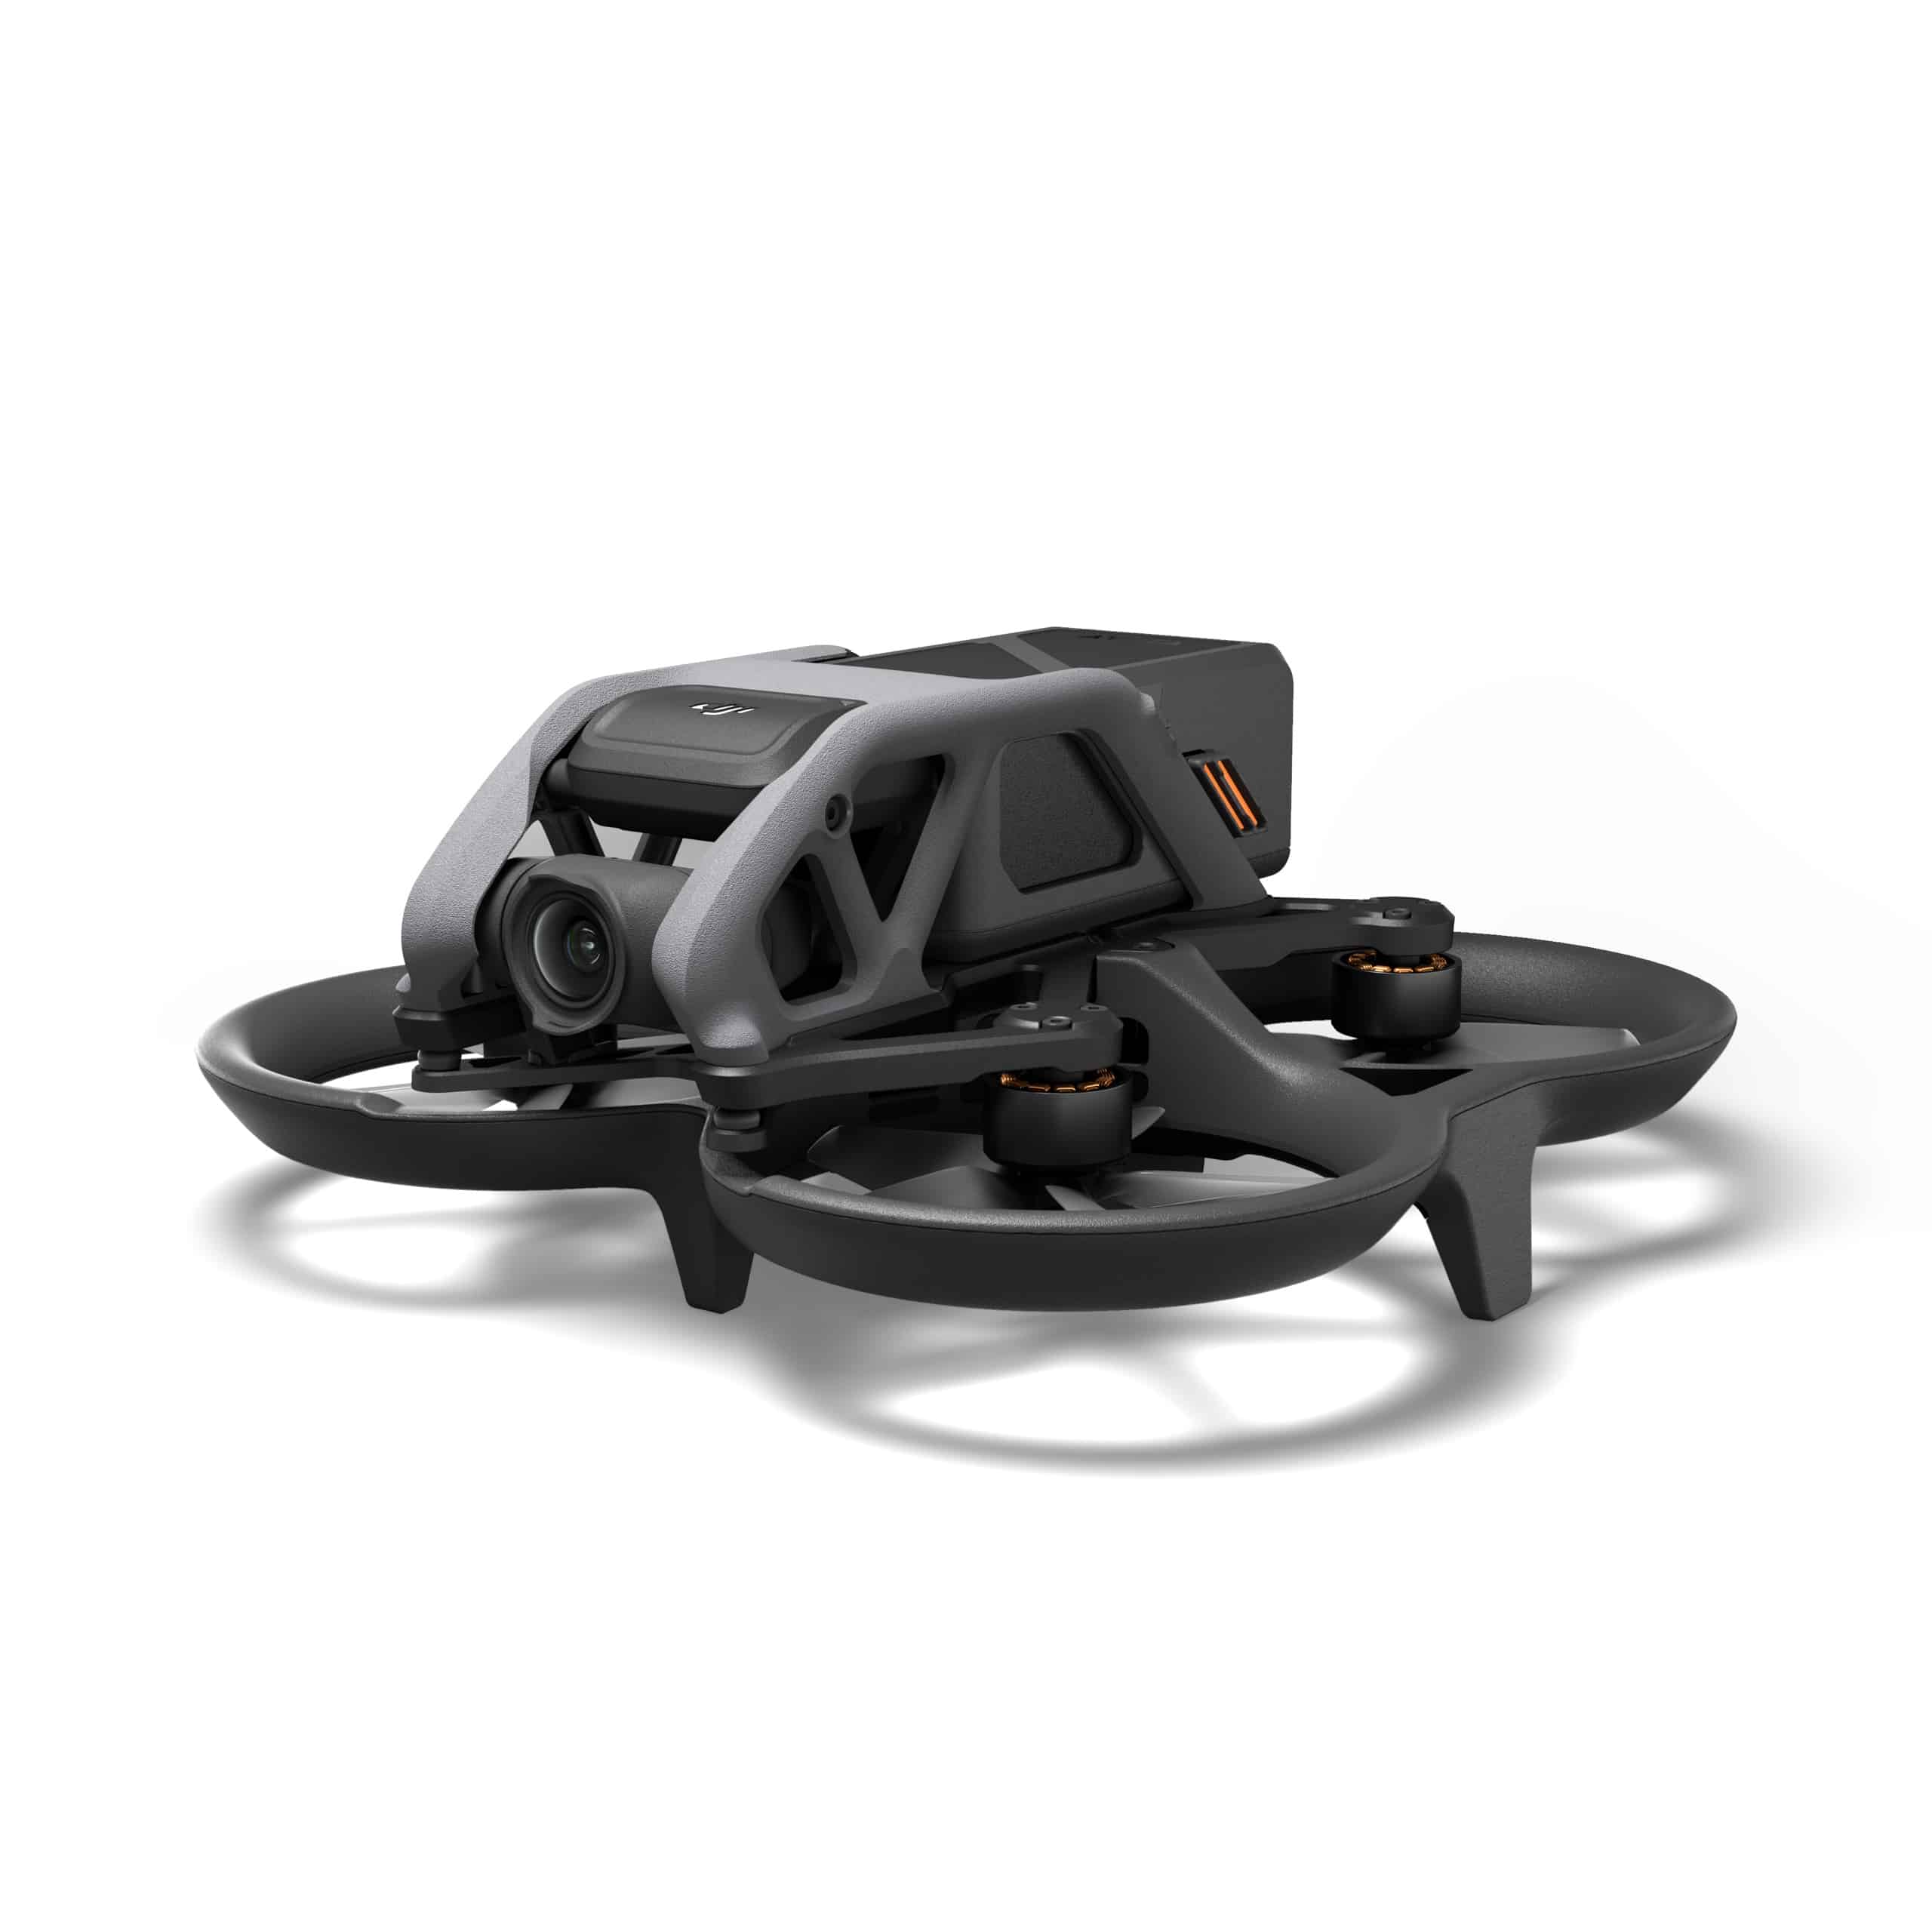  DJI Avata Fly Smart Explorer Combo with Goggles Integra and RC  Motion 2 Controller- First-Person View Drone UAV with 4K Video, Built-in  Propeller Guard, With 128gb Micro SD, Backpack, and More